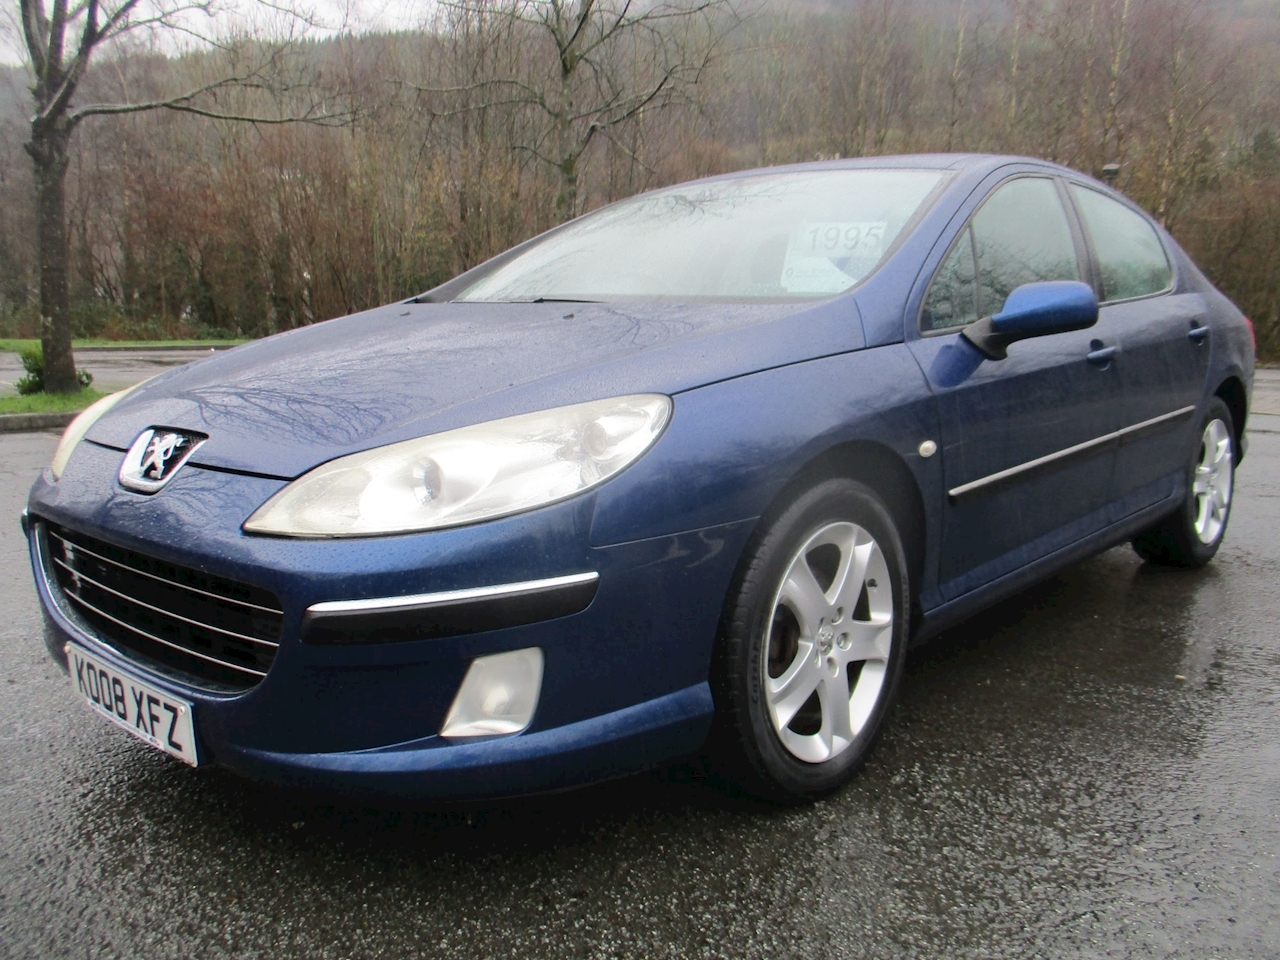 Find Peugeot 407 hdi for sale - AutoScout24